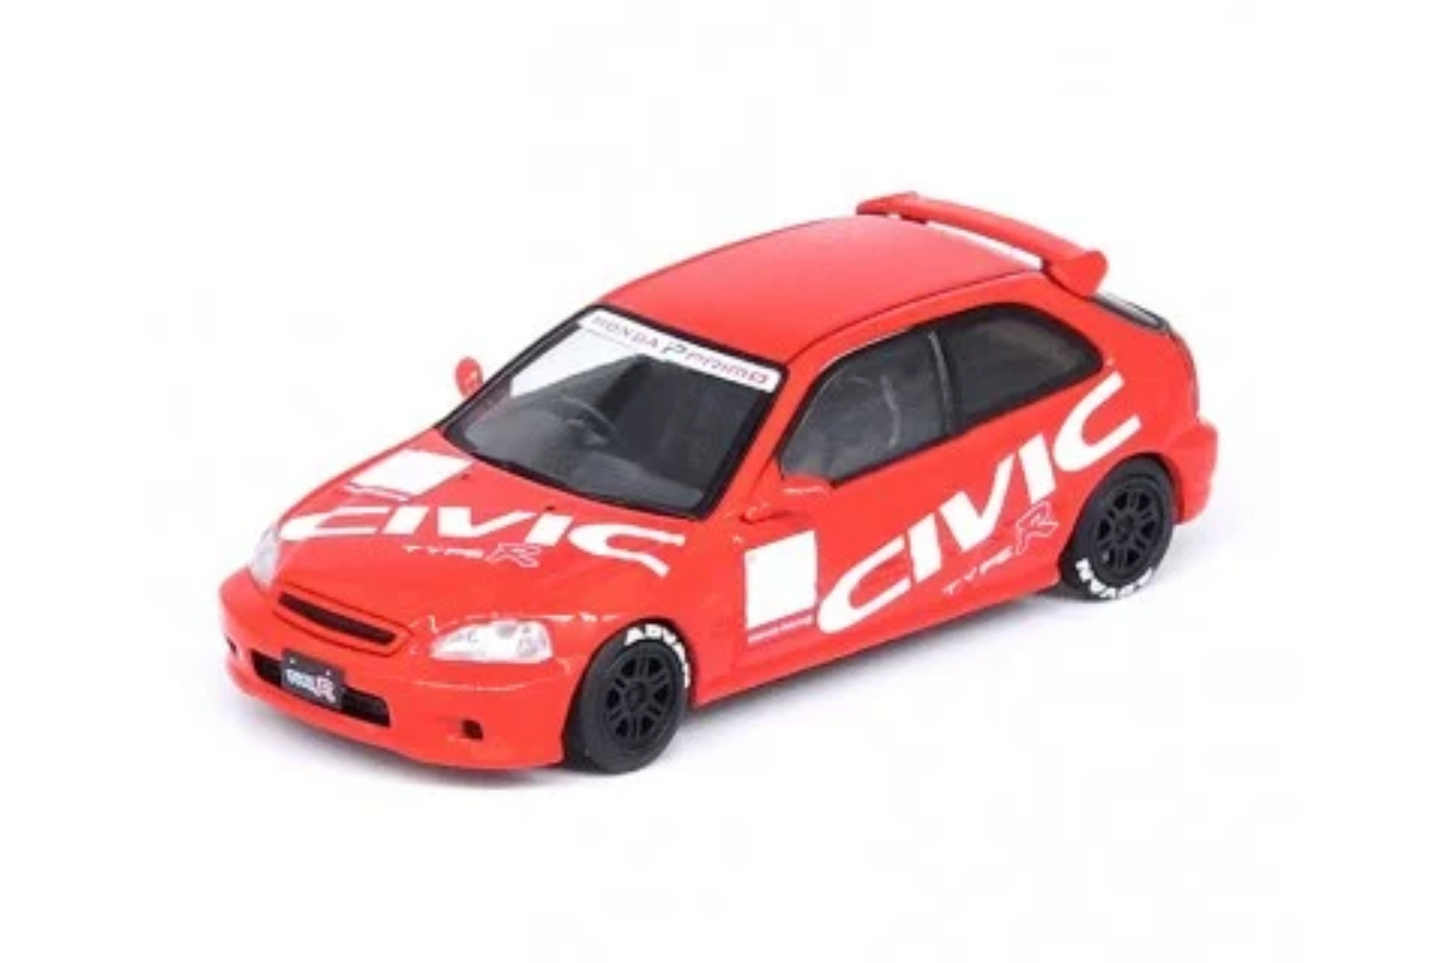 [INNO64] Honda Civic Type-R (EK9) Red With "Civic" Livery